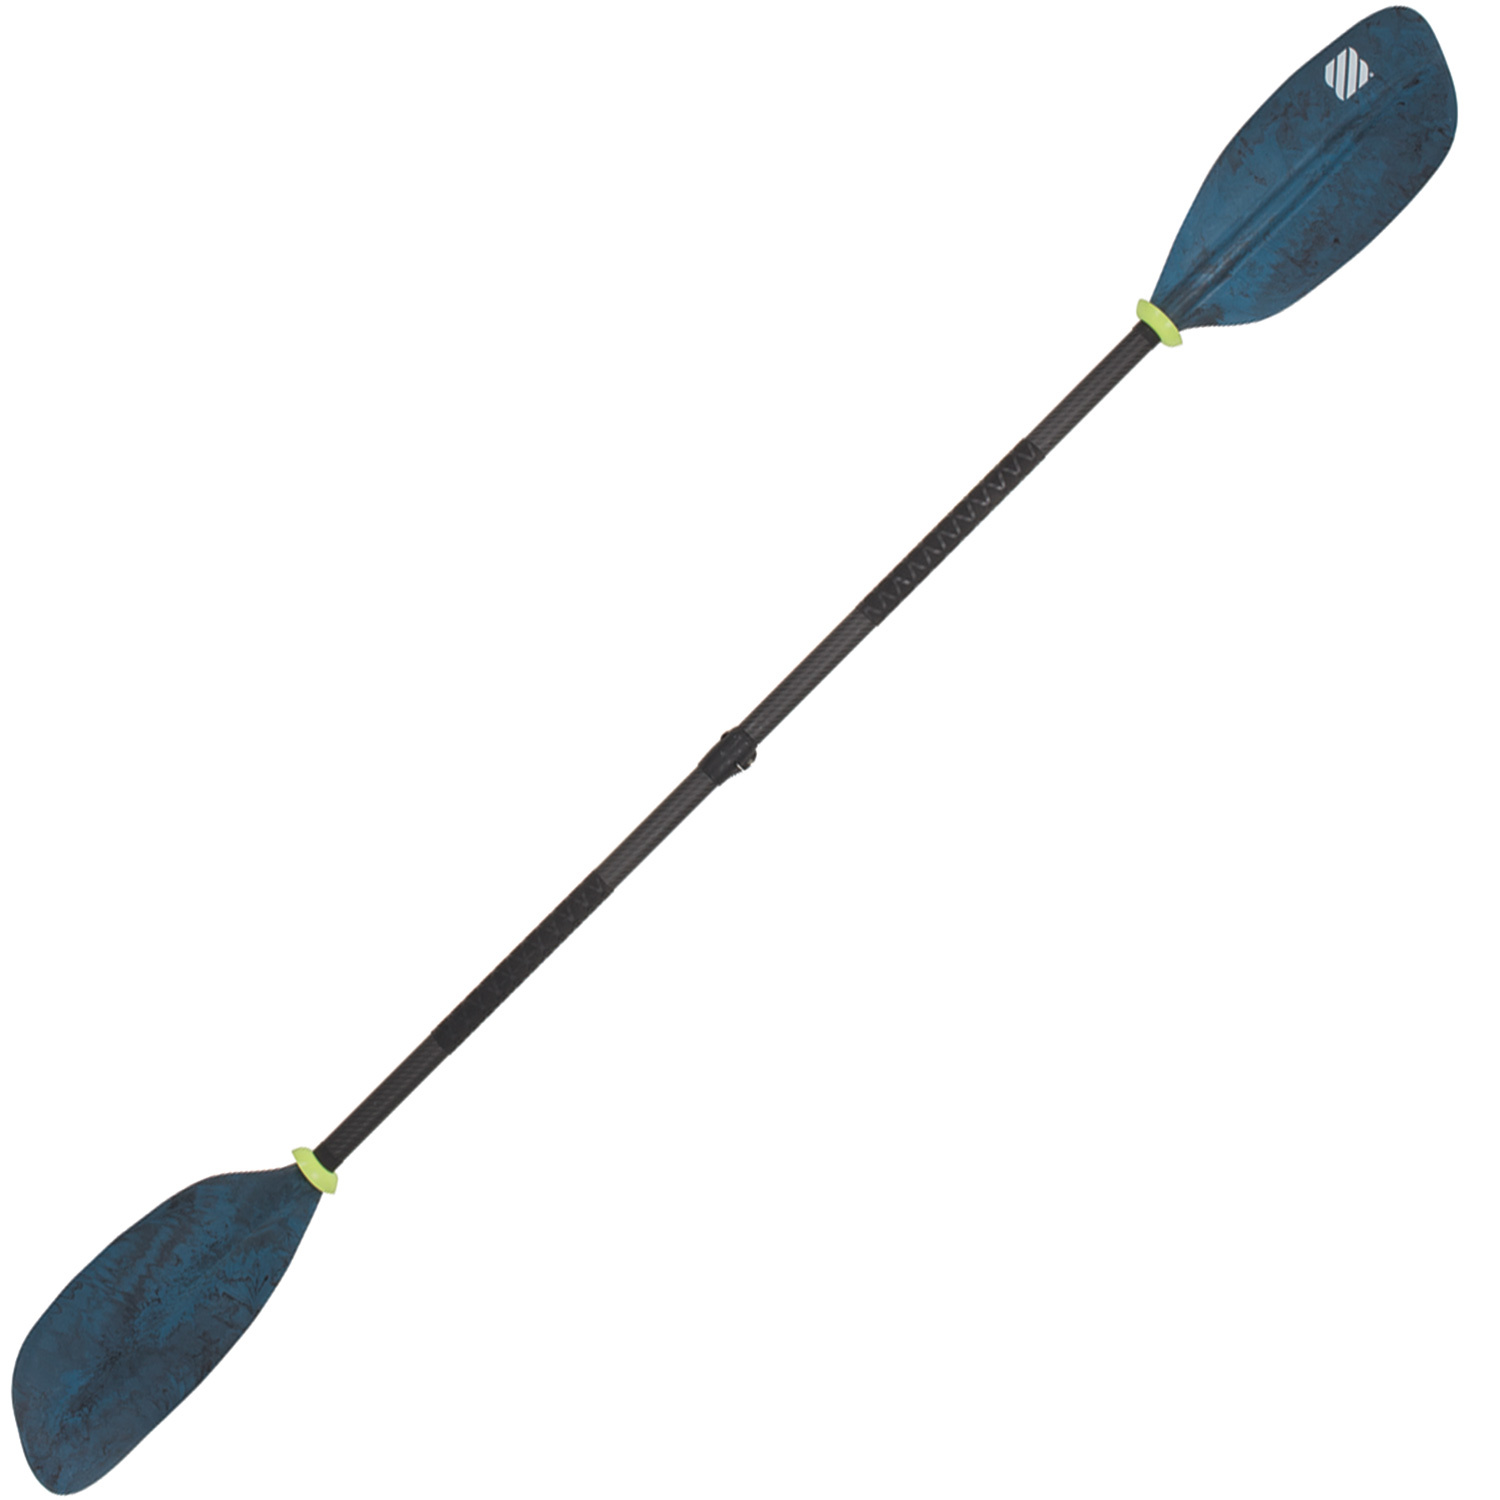 Carbon Shaft Two-Piece Adjustable And Collapsible Kayak Paddle 210-220 cm 